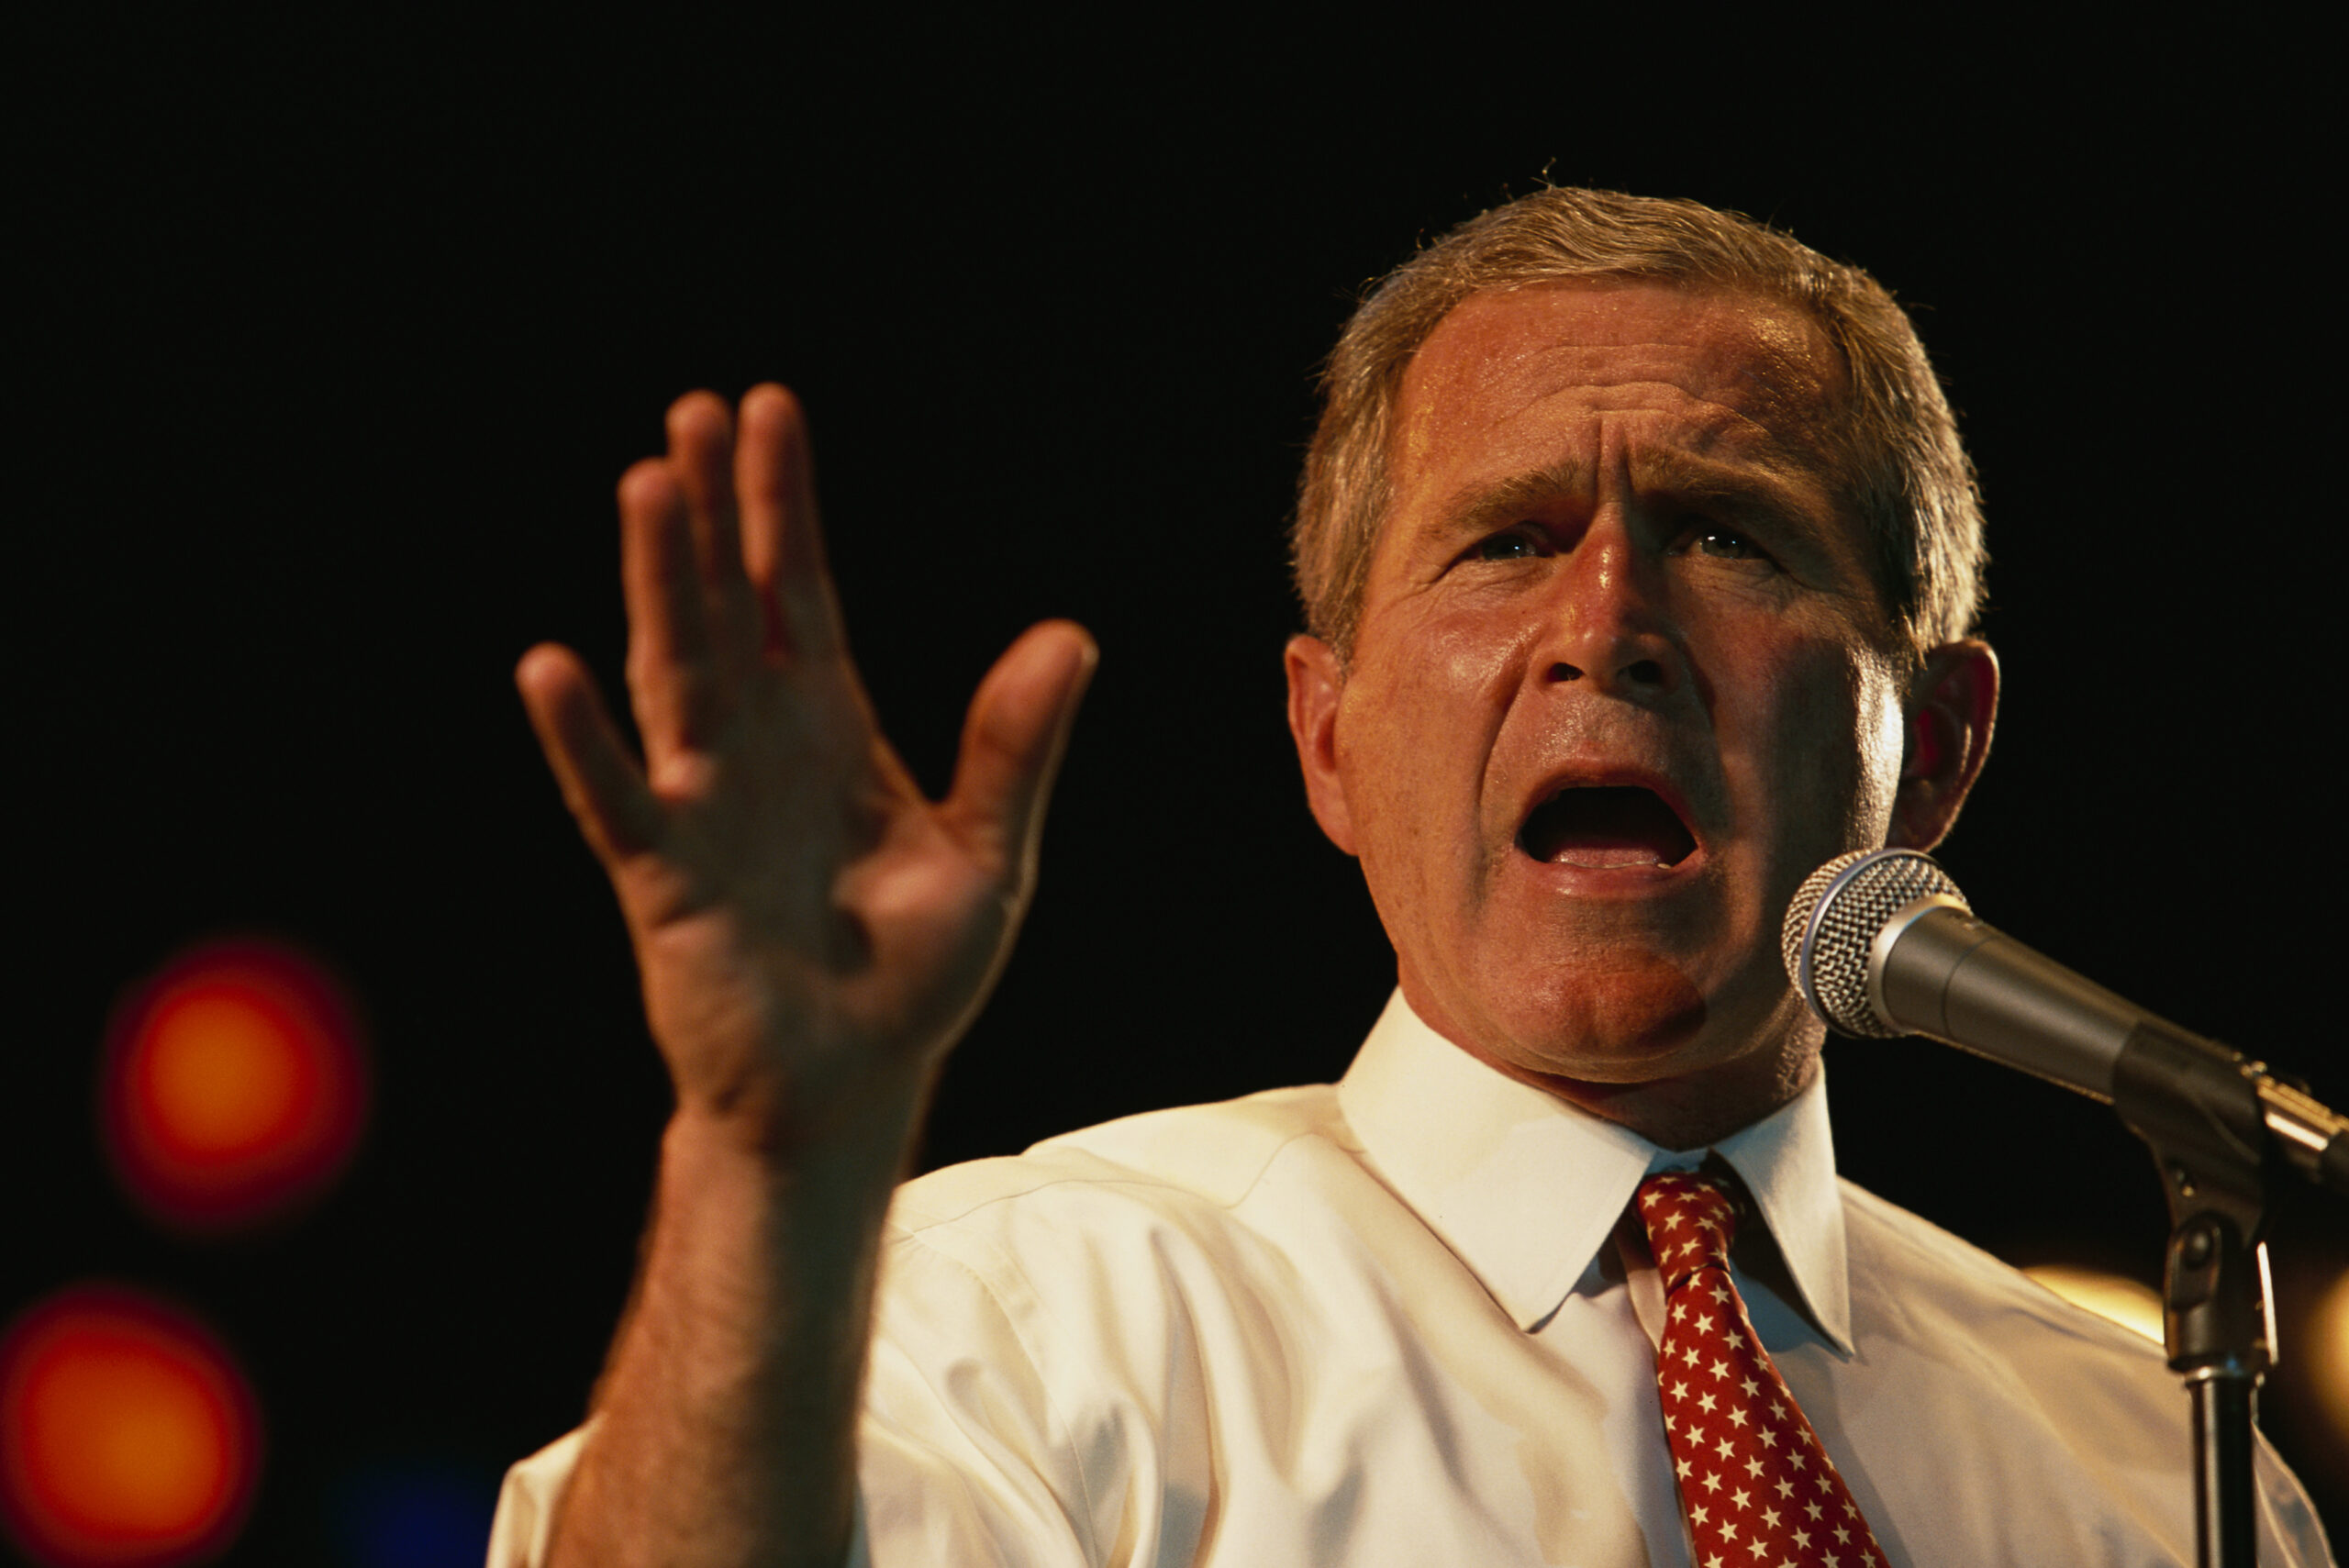 George W. Bush speaks at a rally during his presidential campaign. Bush won the 2000 Presidential Election against Vice President Al Gore after a controversial vote recount in Florida. (Photo by Brooks Kraft LLC/Sygma via Getty Images)